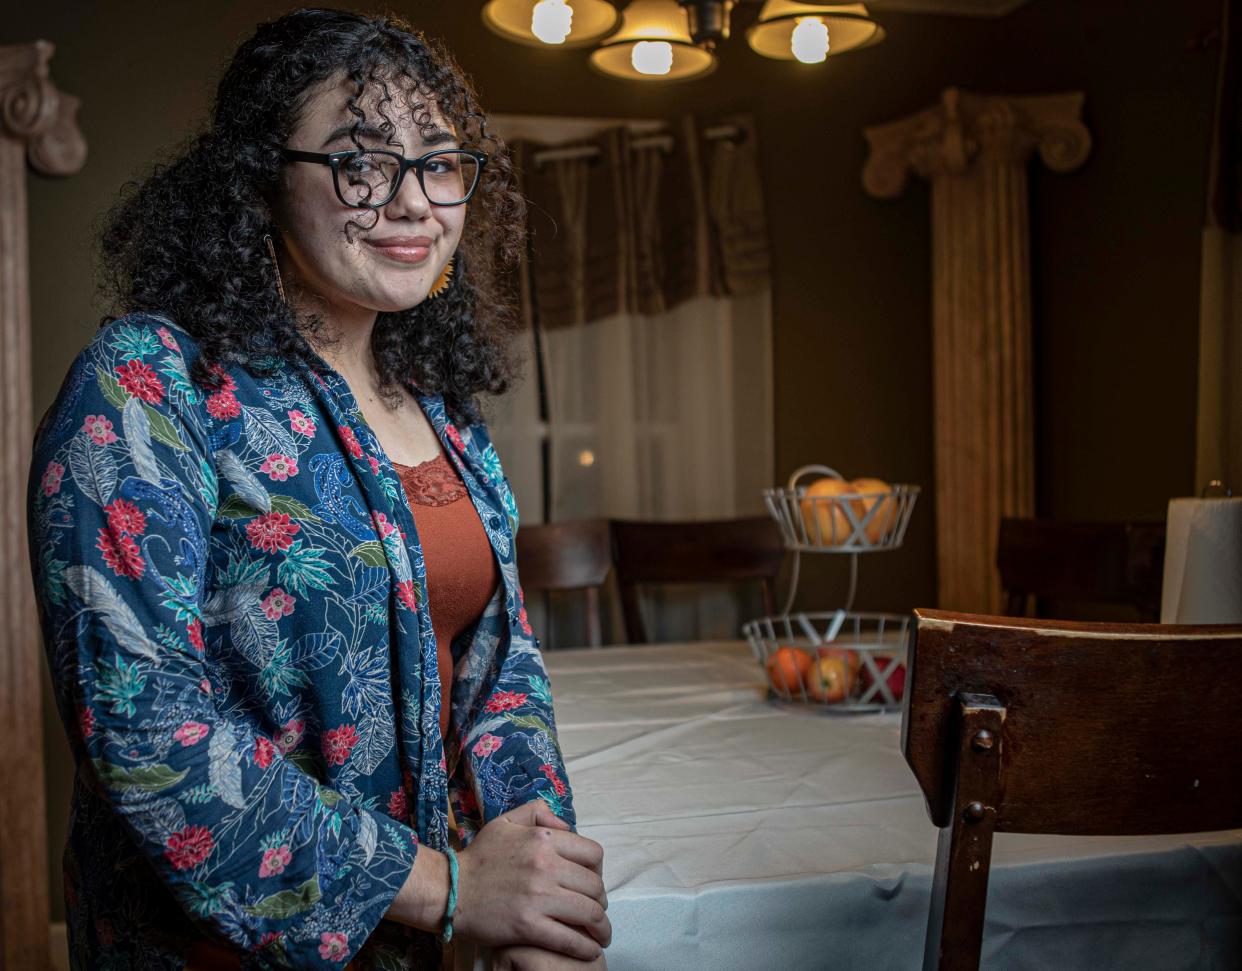 Auburn High School's Giulyana Gamero, Rockford Youth Poet Laureate for 2022, poses for a photo in her home on Wednesday, Jan. 12, 2022, in Rockford.